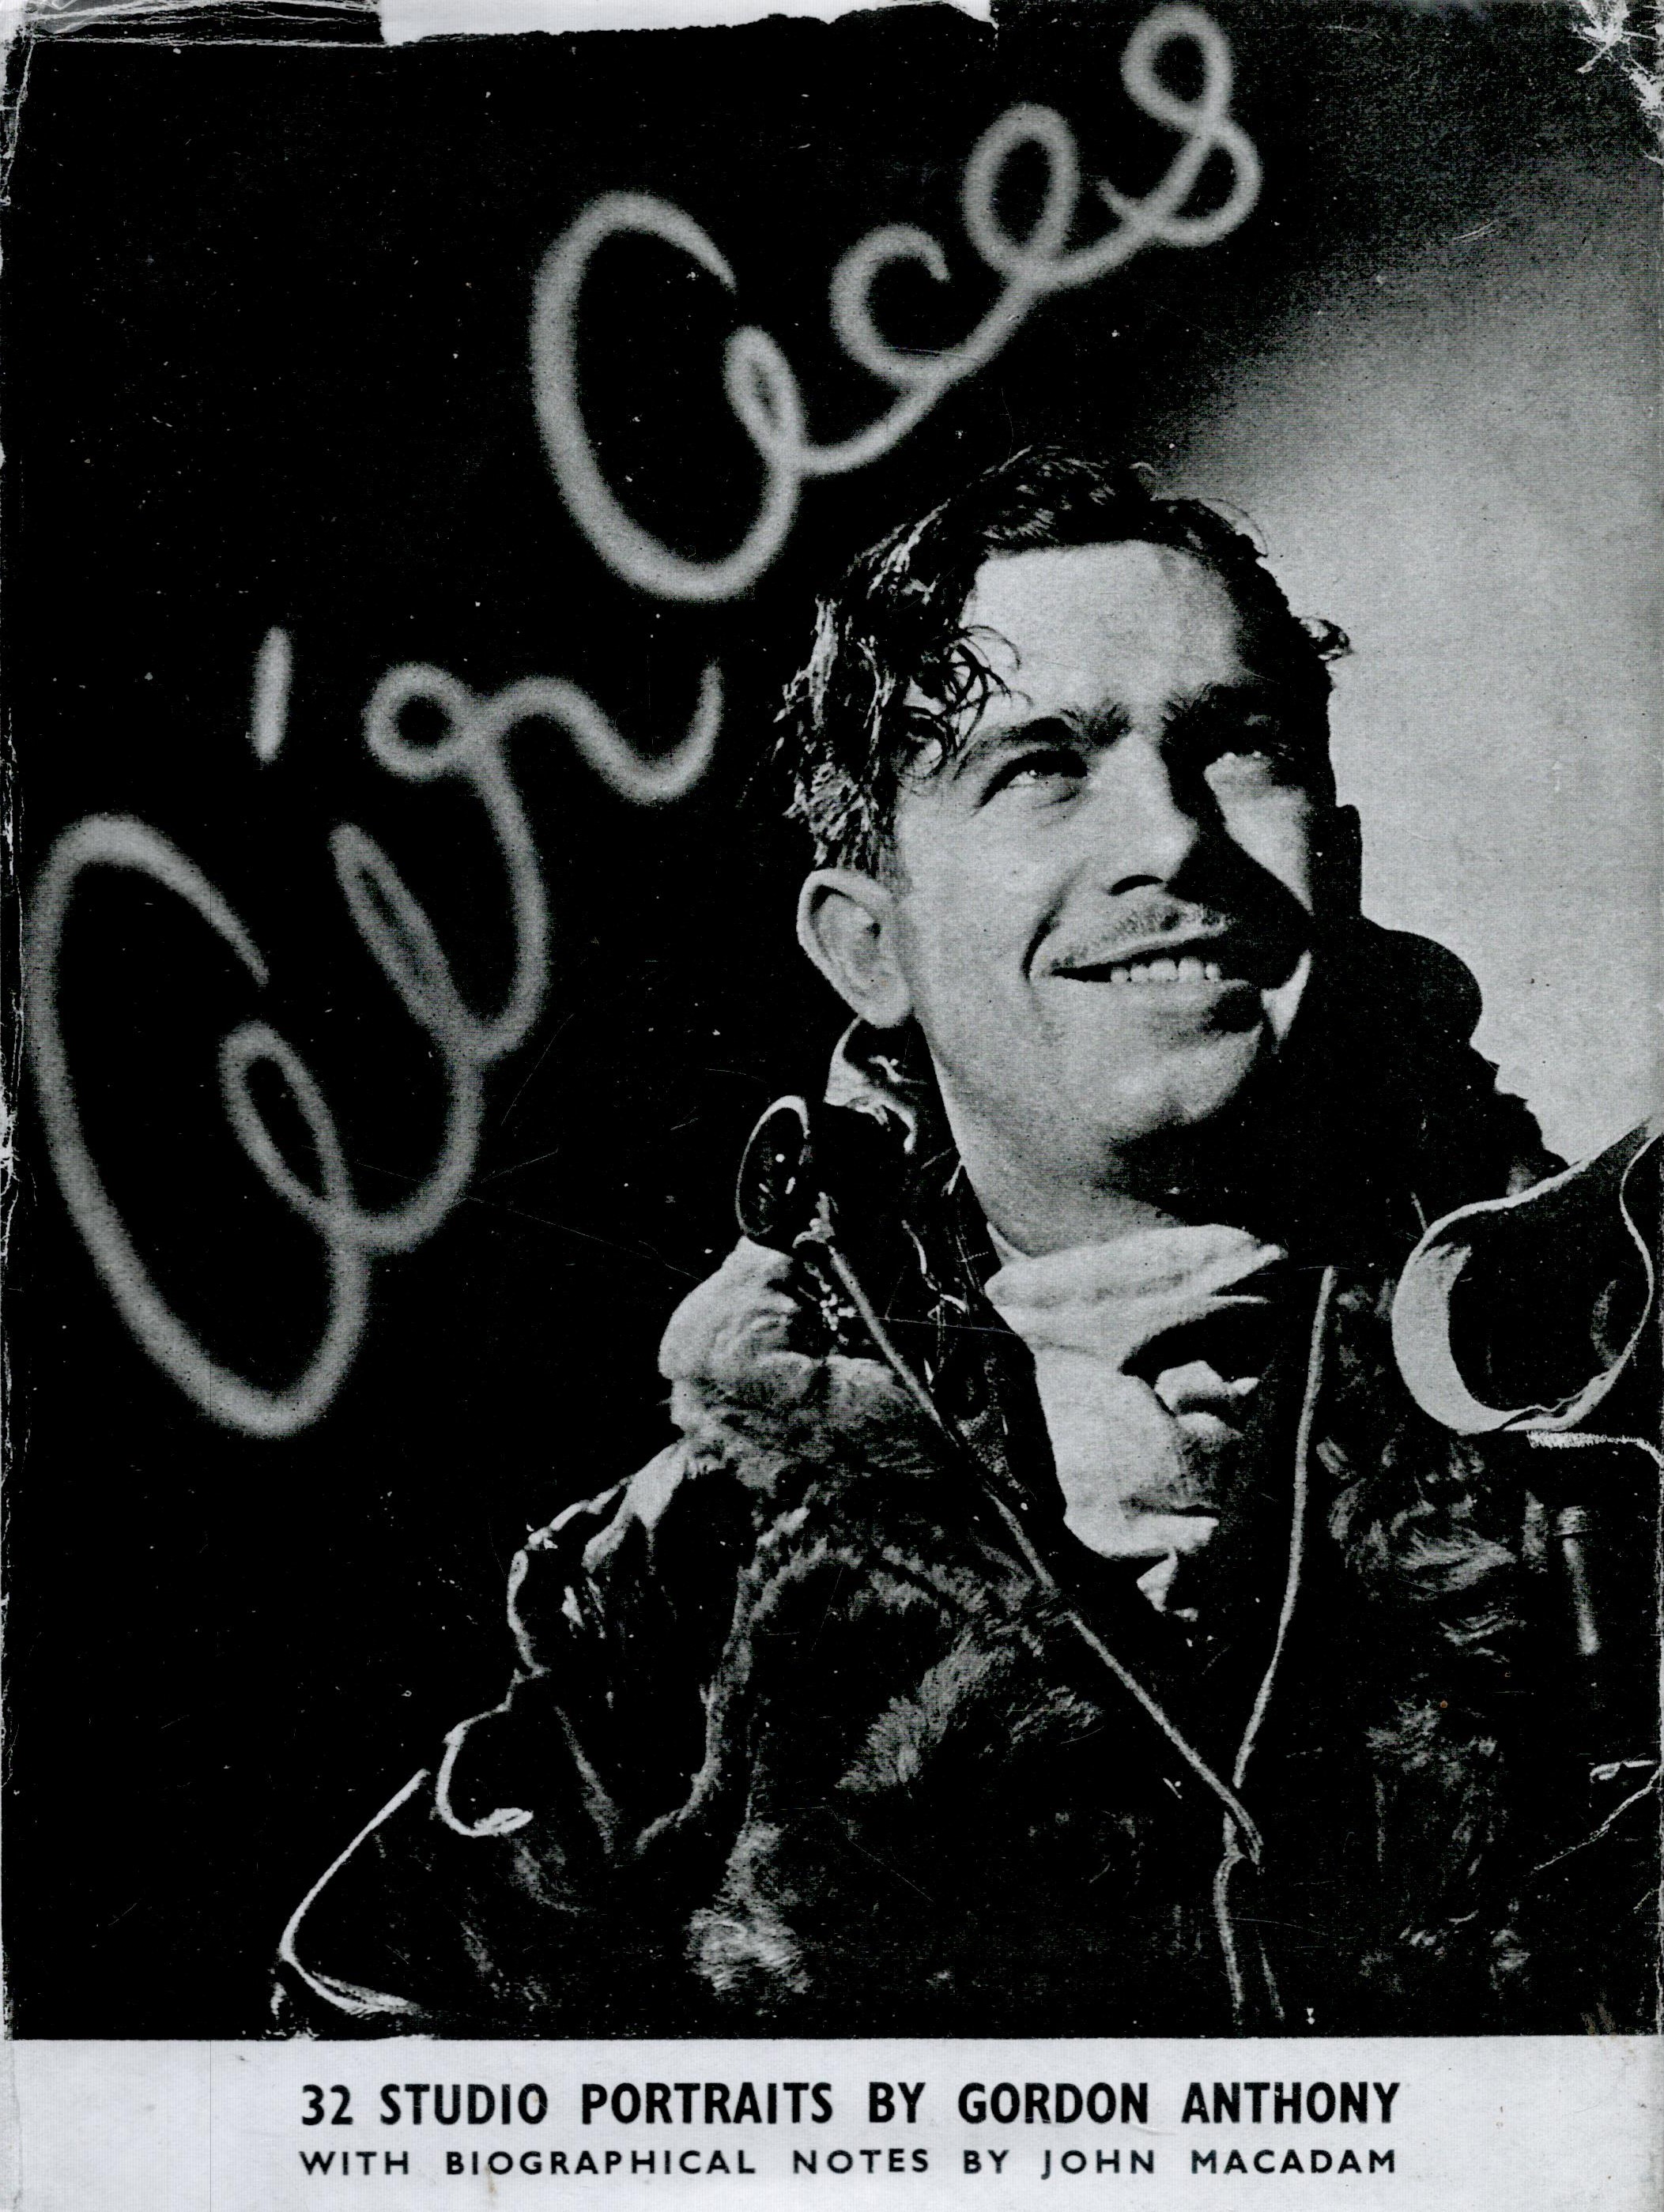 WW2 Air Vice Marshal Johnnie Johnson CBE DSO DFC Signed Signature Card Attached to inside page of